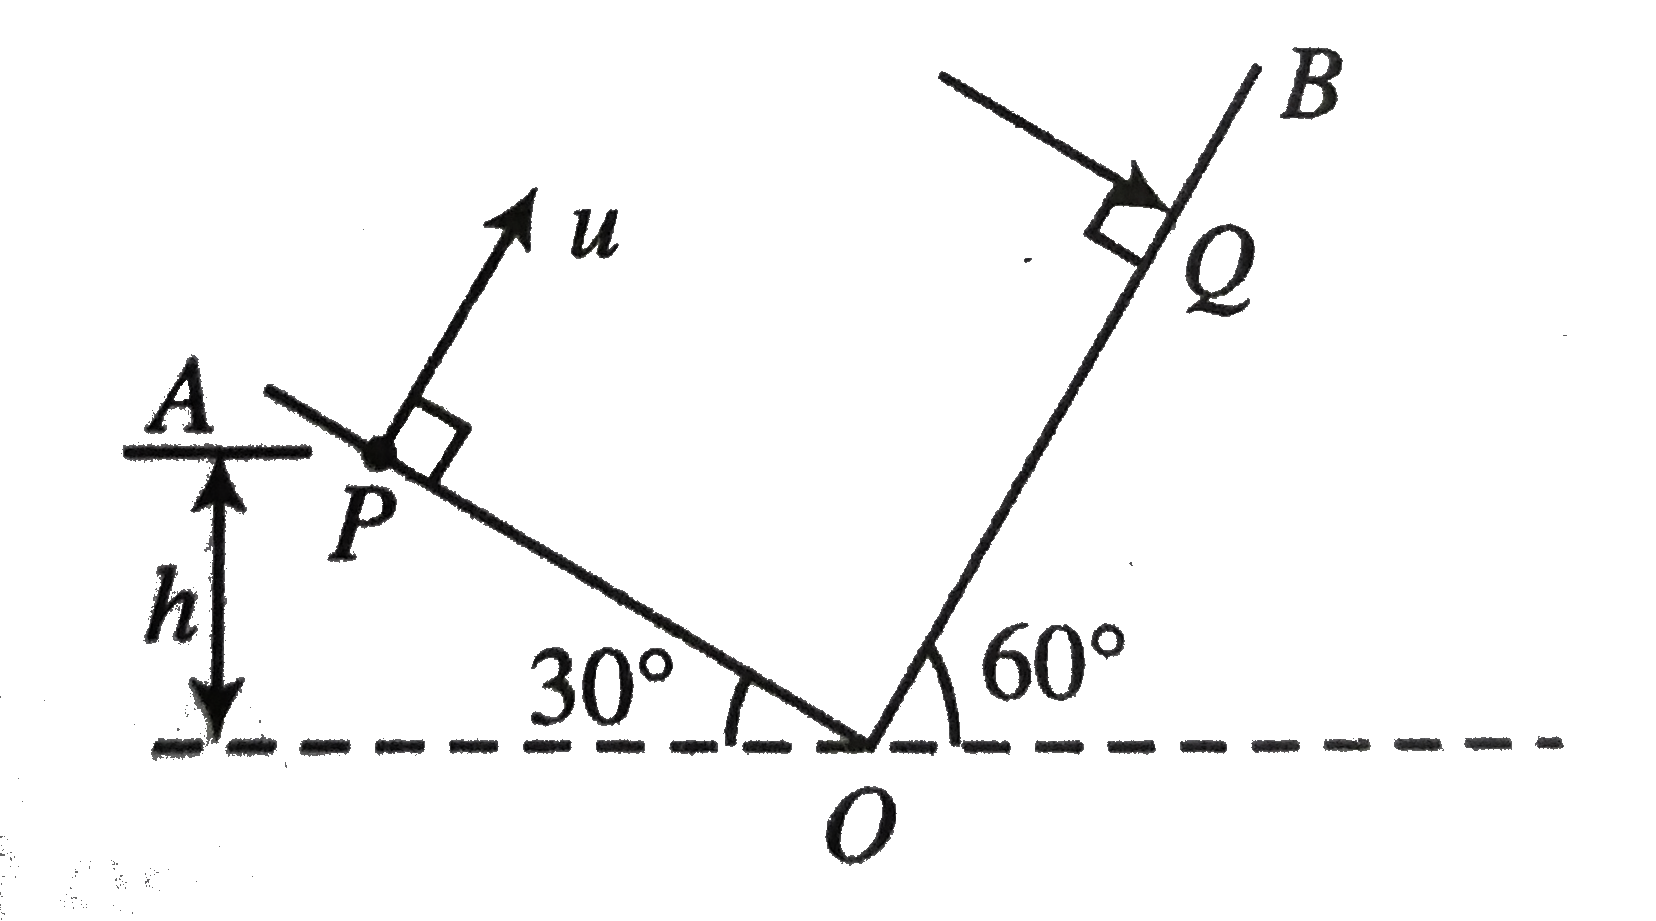 Two inclined planes OA and OB having inclination (with horizontal) 30^(@) and 60^(@), respectively, intersect each other at O as shown in figure. A particle is projected from point P with velocity u = 10(sqrt3) ms^(-1) along a direction perpendicular to plane OA. If the particle strikes plane OB perpendicularly at Q, calculate      The velocity with which particle strikes the plane OB,